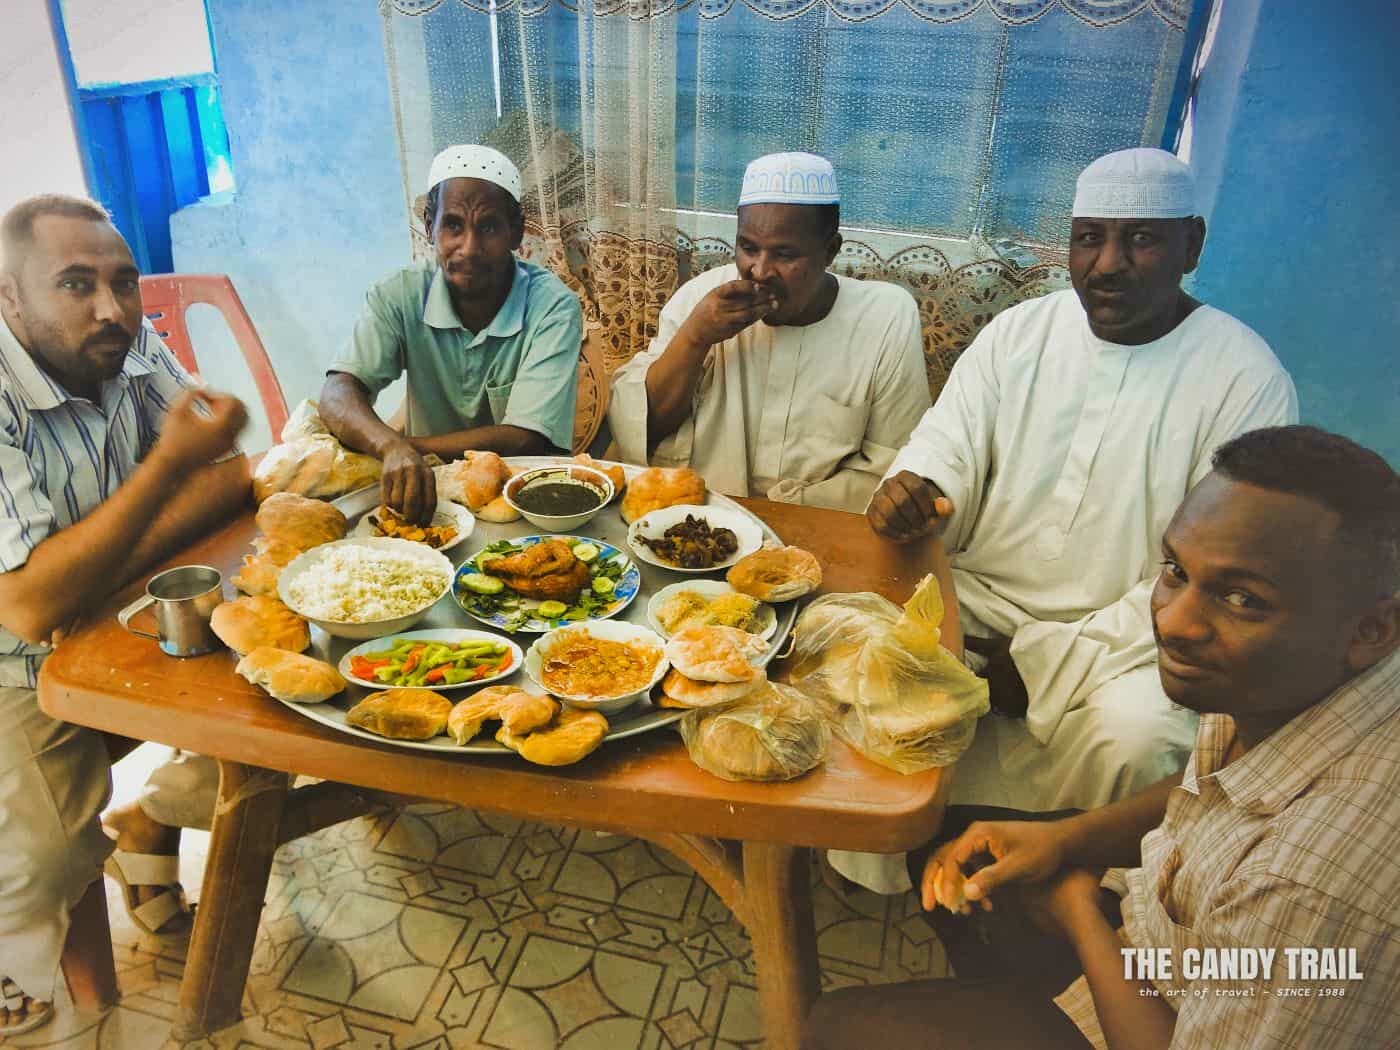 men at wedding reception meal in  dongola sudan